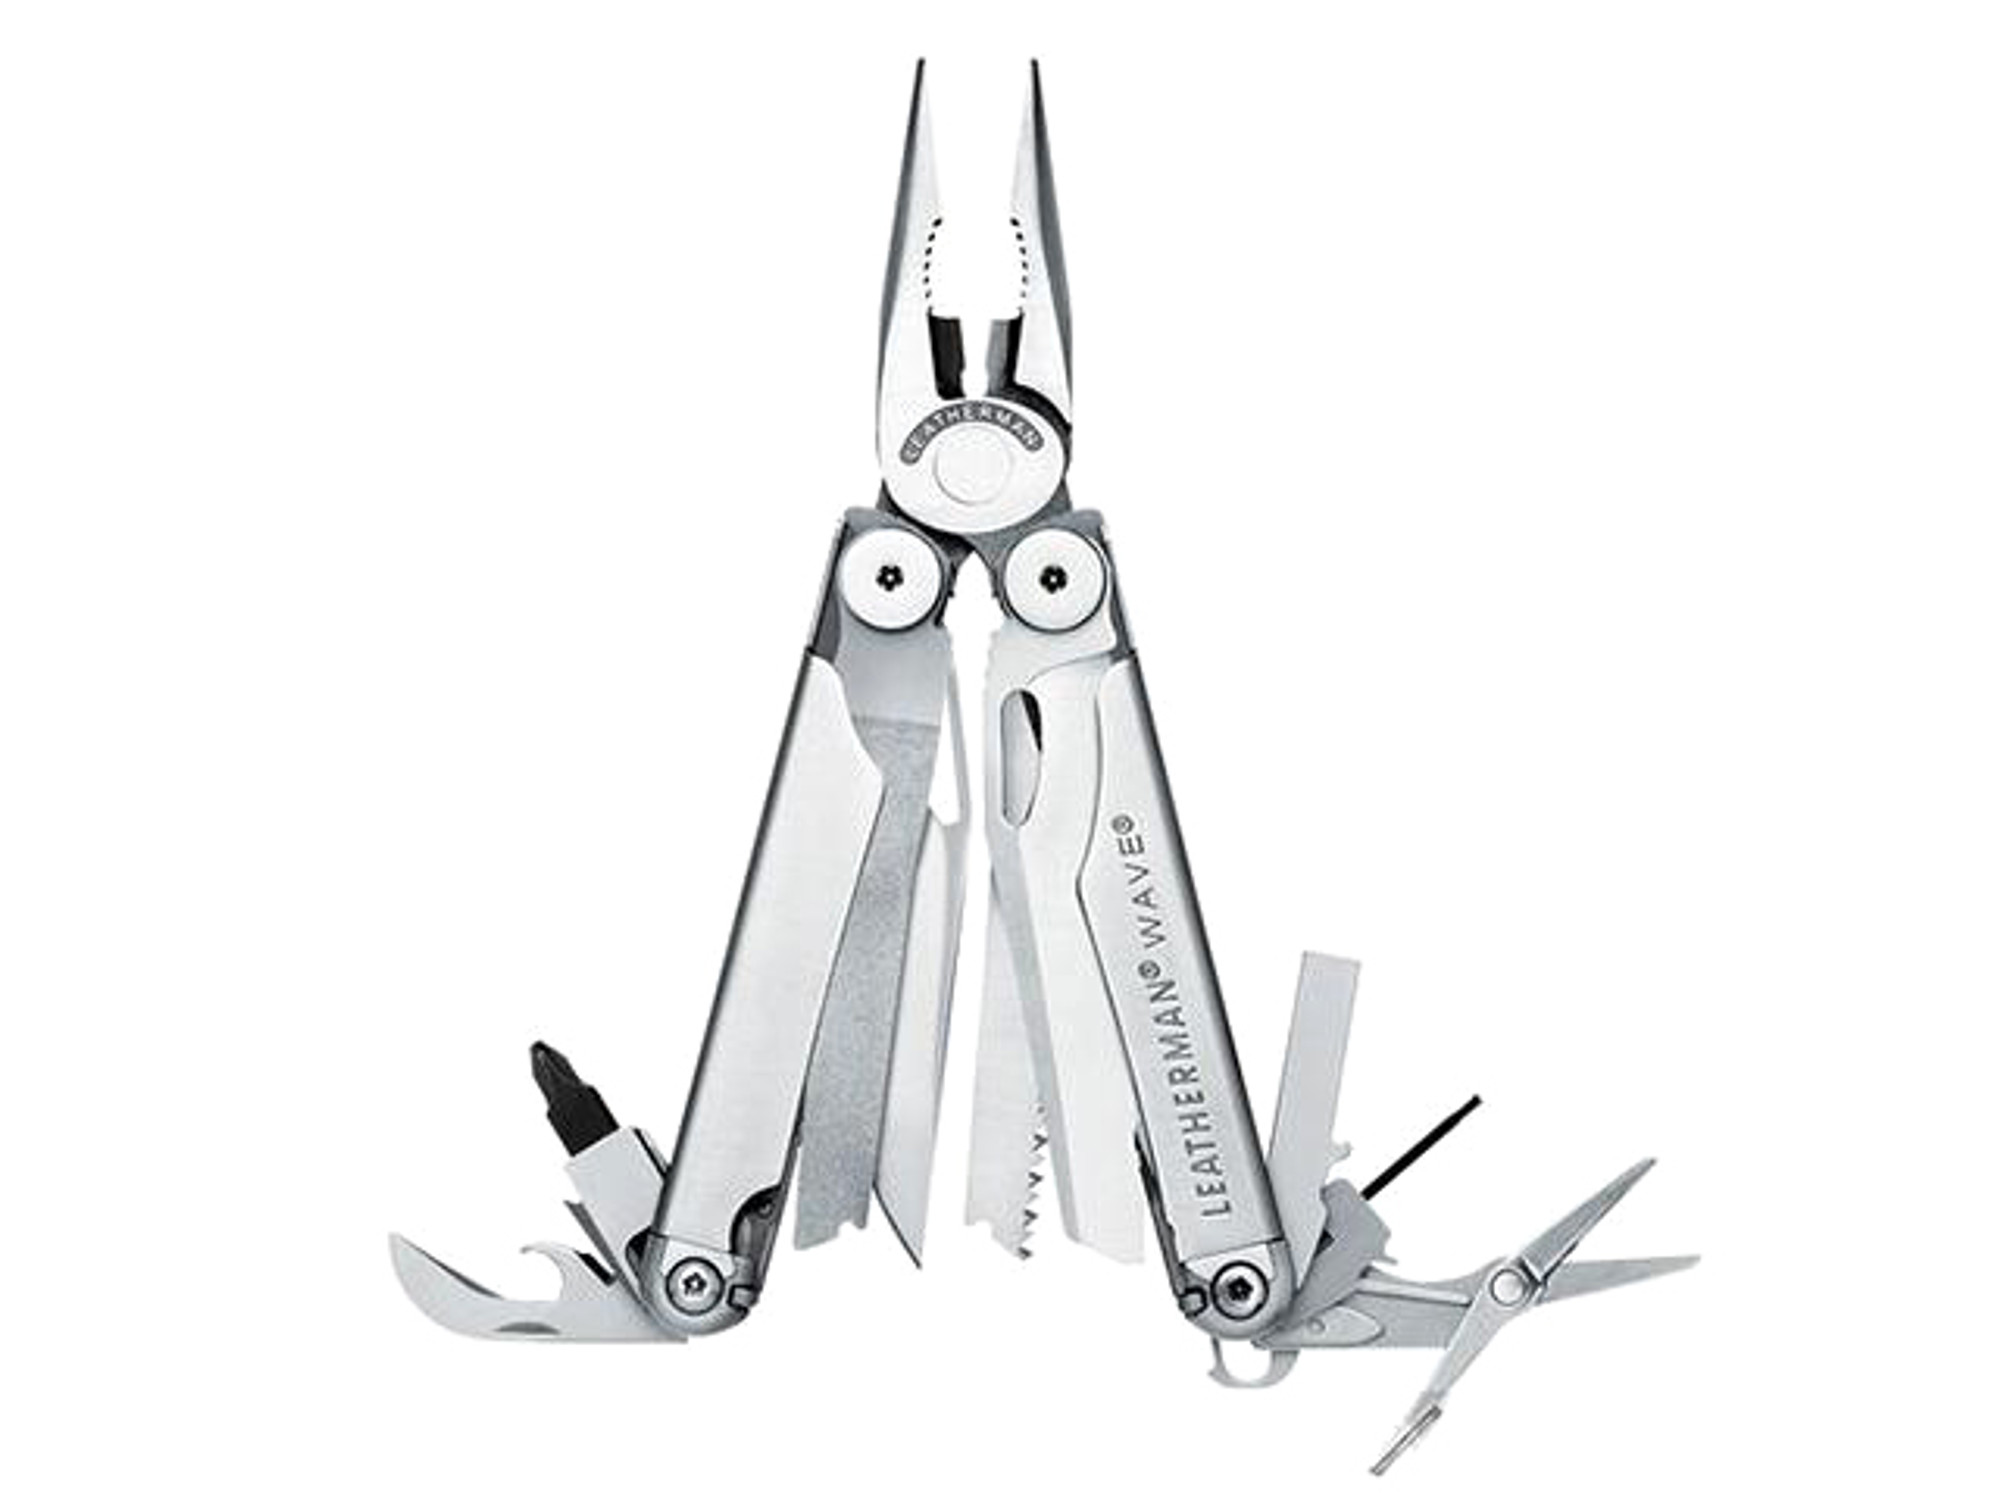 Leatherman "Wave +" Multi-Tool with MOLLE Sheath (Color: Brushed Stainless Steel)